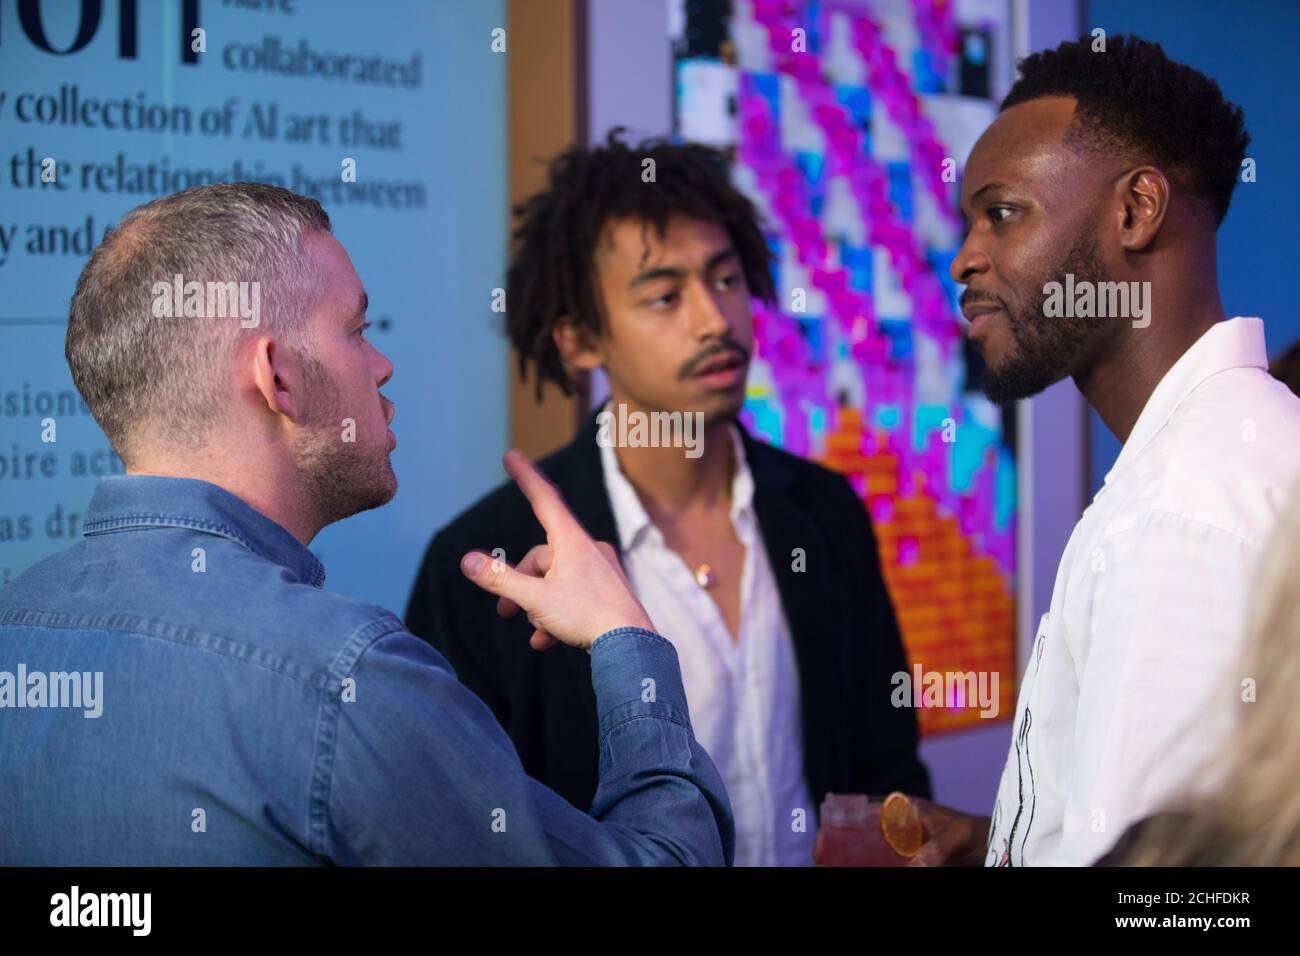 EDITORIAL USE ONLY Russell Tovey talking with Jordan Stephens and Yinka Ilor at the Bombay Sapphire Stir Creativity Lounge at Frieze London, where the gin brand is launching a new Artificial Intelligence art collection in collaboration with artist Yinka Ilori. Stock Photo